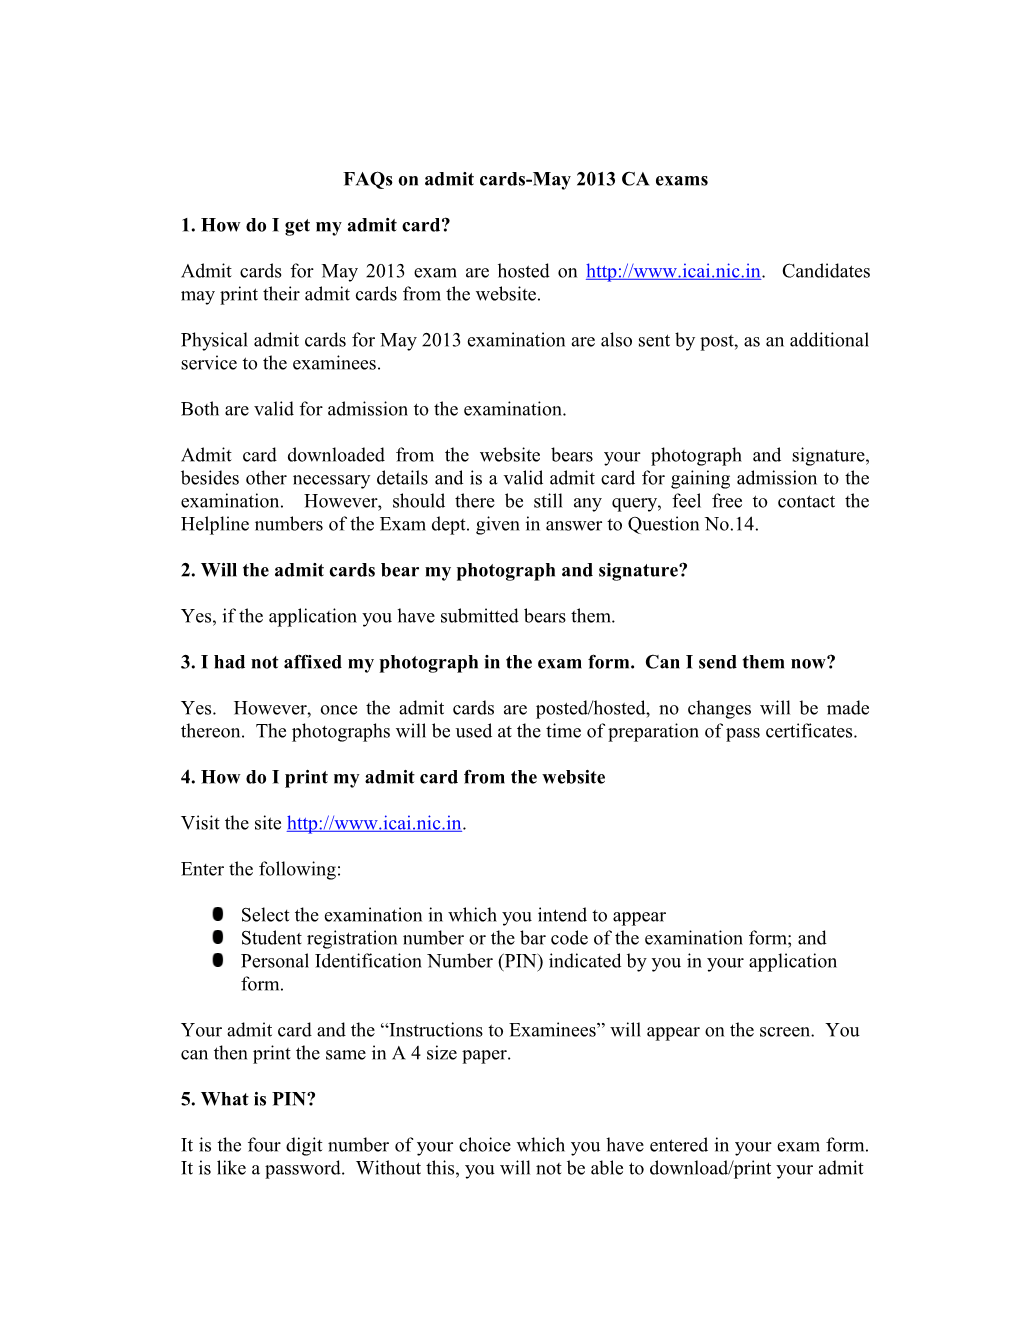 Faqs on Admit Cards for May 2012 Exams